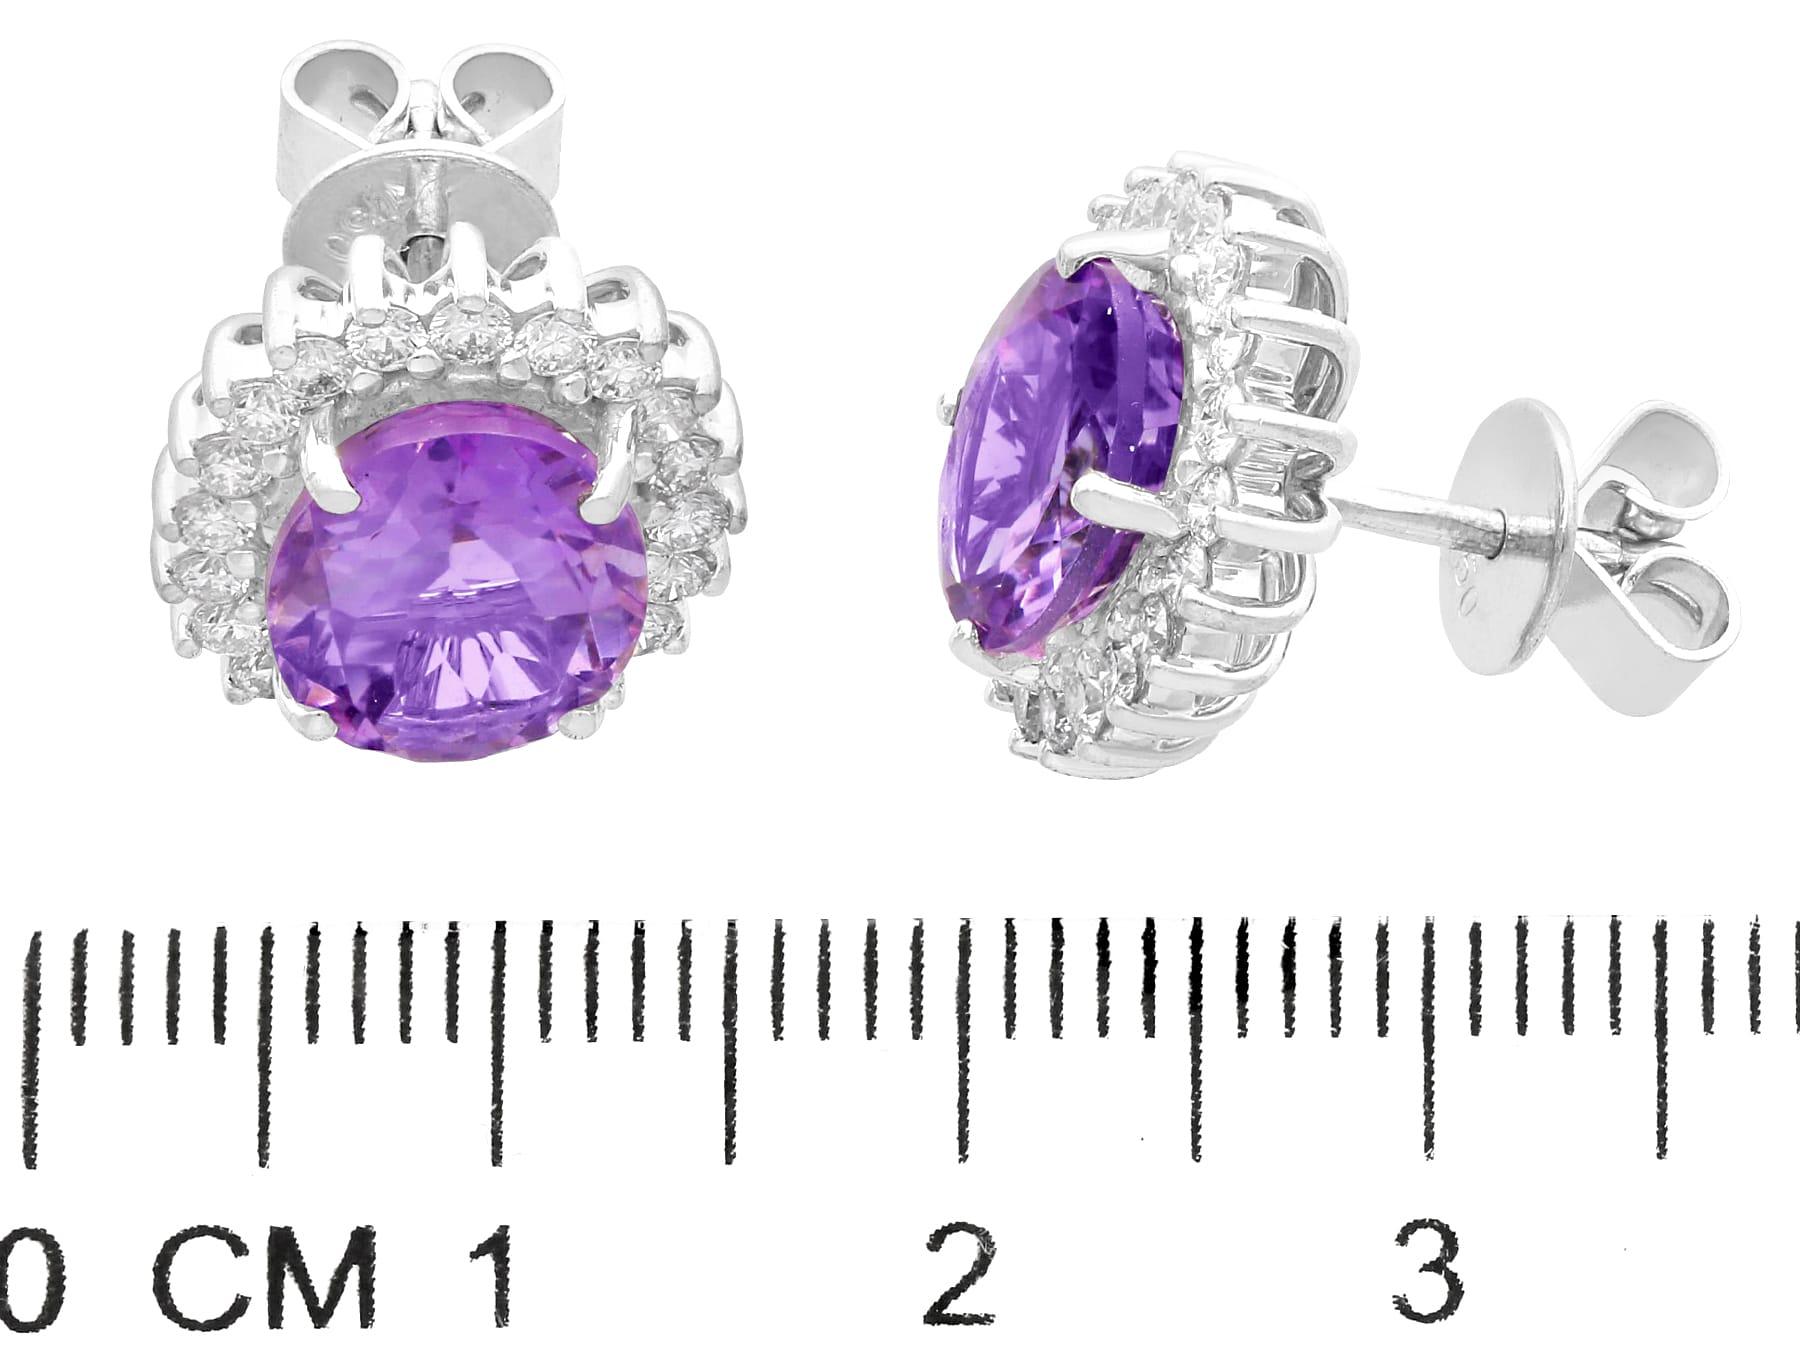 Vintage 3.50ct Amethyst and 0.80ct Diamond Cluster Earrings in 9ct White Gold For Sale 2